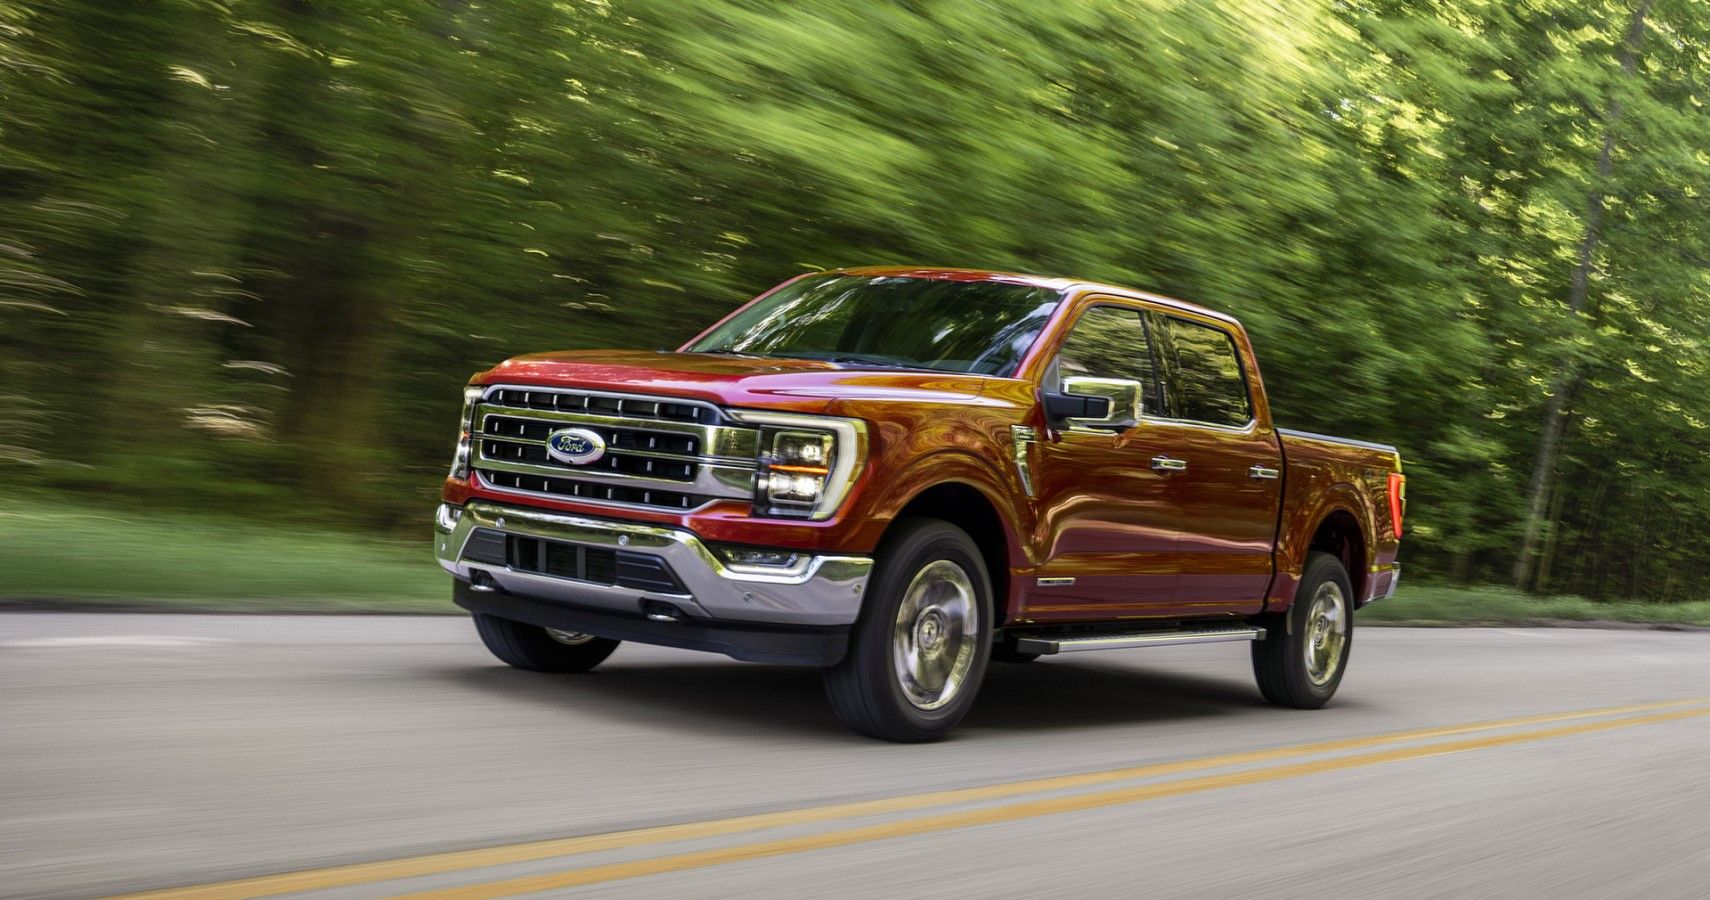 2021 Ford F-150 front third quarter view